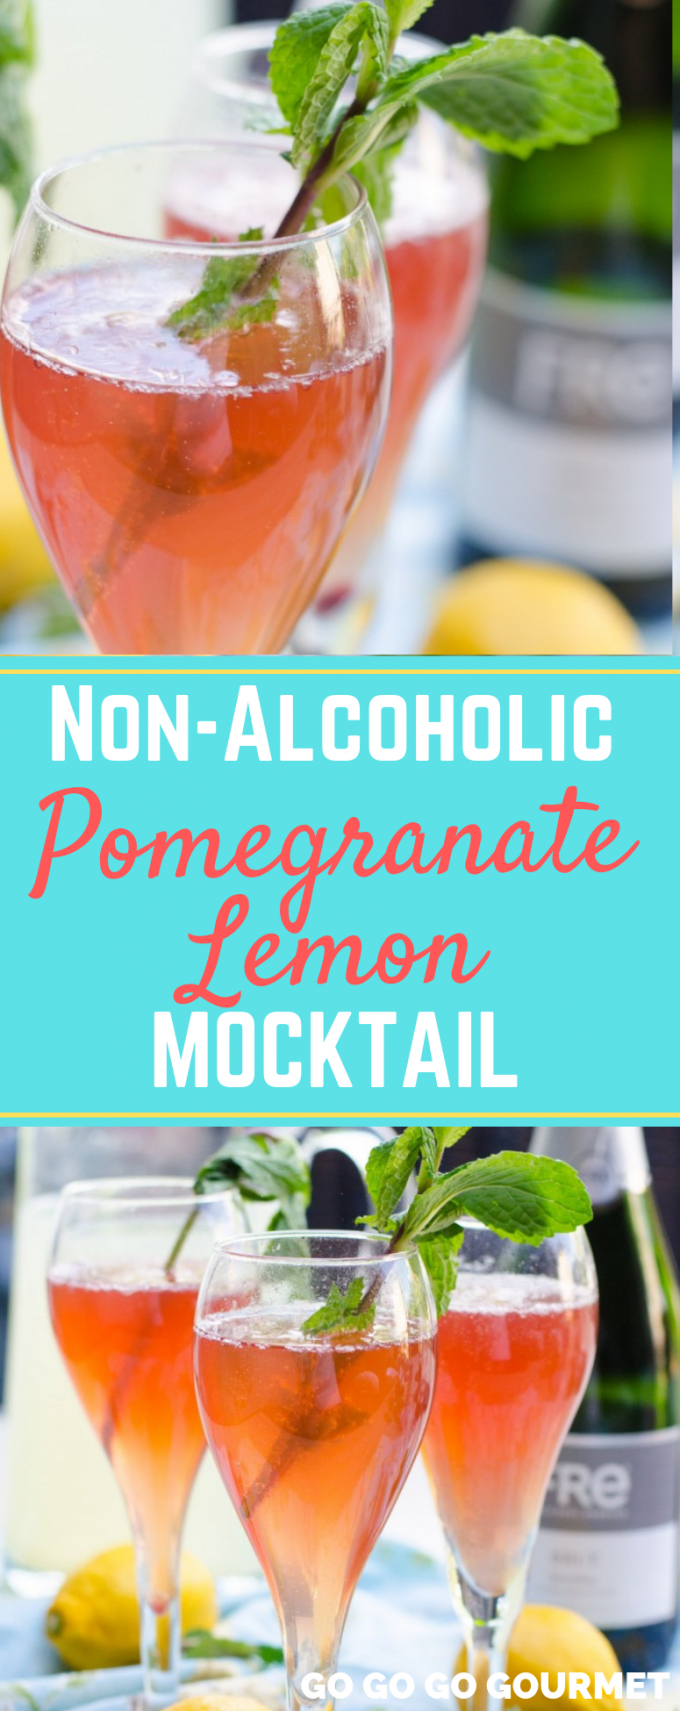 This non-alcoholic Pomegranate Lemon Spritzer is one of the best summer drink recipes! To turn it into a cocktail, just add one of your favorite white wines, or even vodka! #gogogogourmet #pomegranatelemonspritzer #mocktailrecipes #summerdrinkrecipes via @gogogogourmet